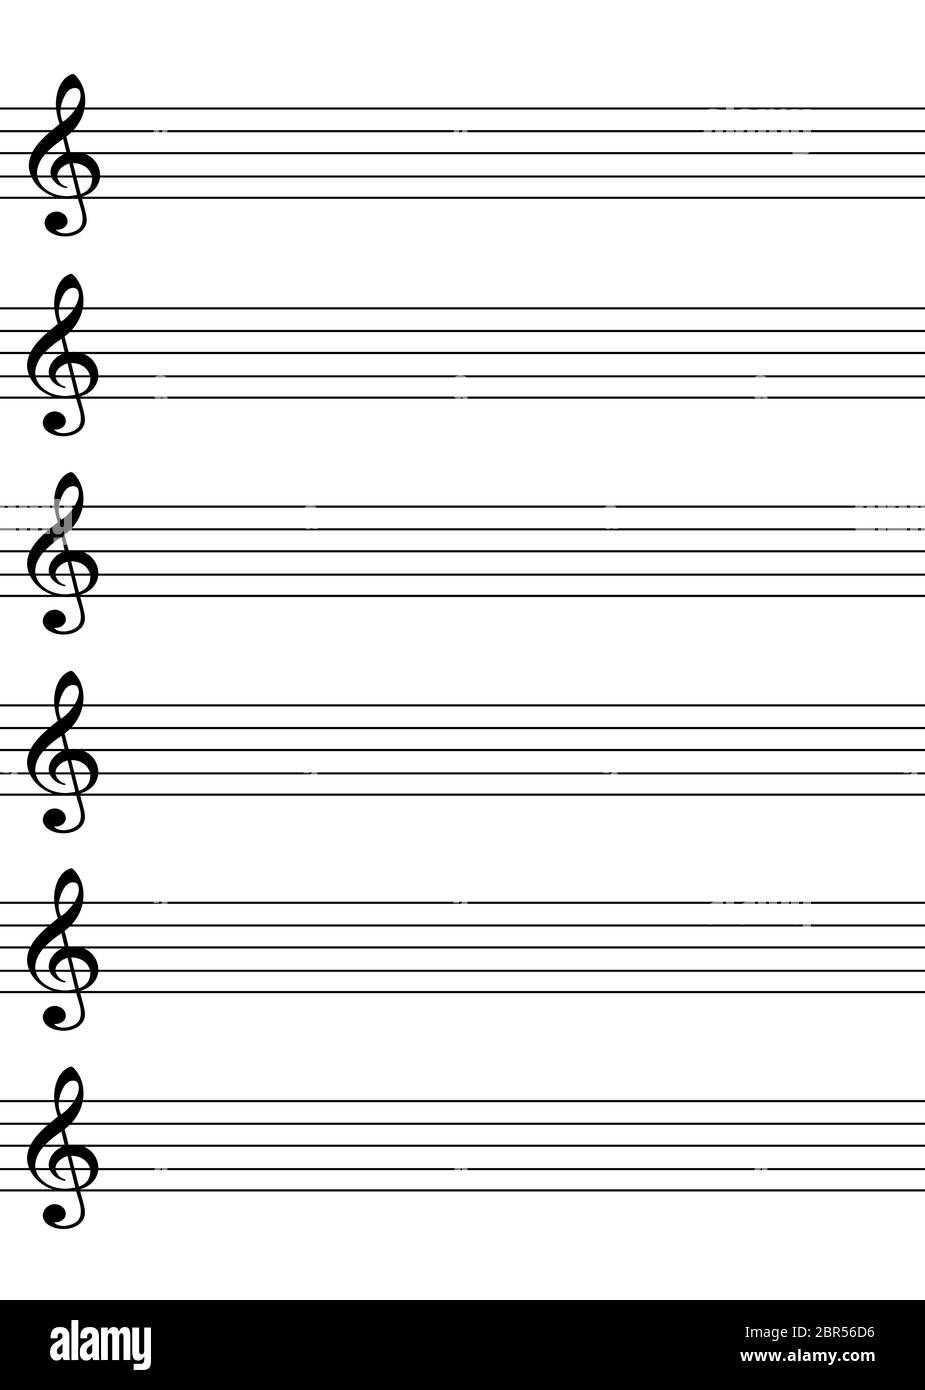 Sheet music paper with treble clef Stock Photo - Alamy